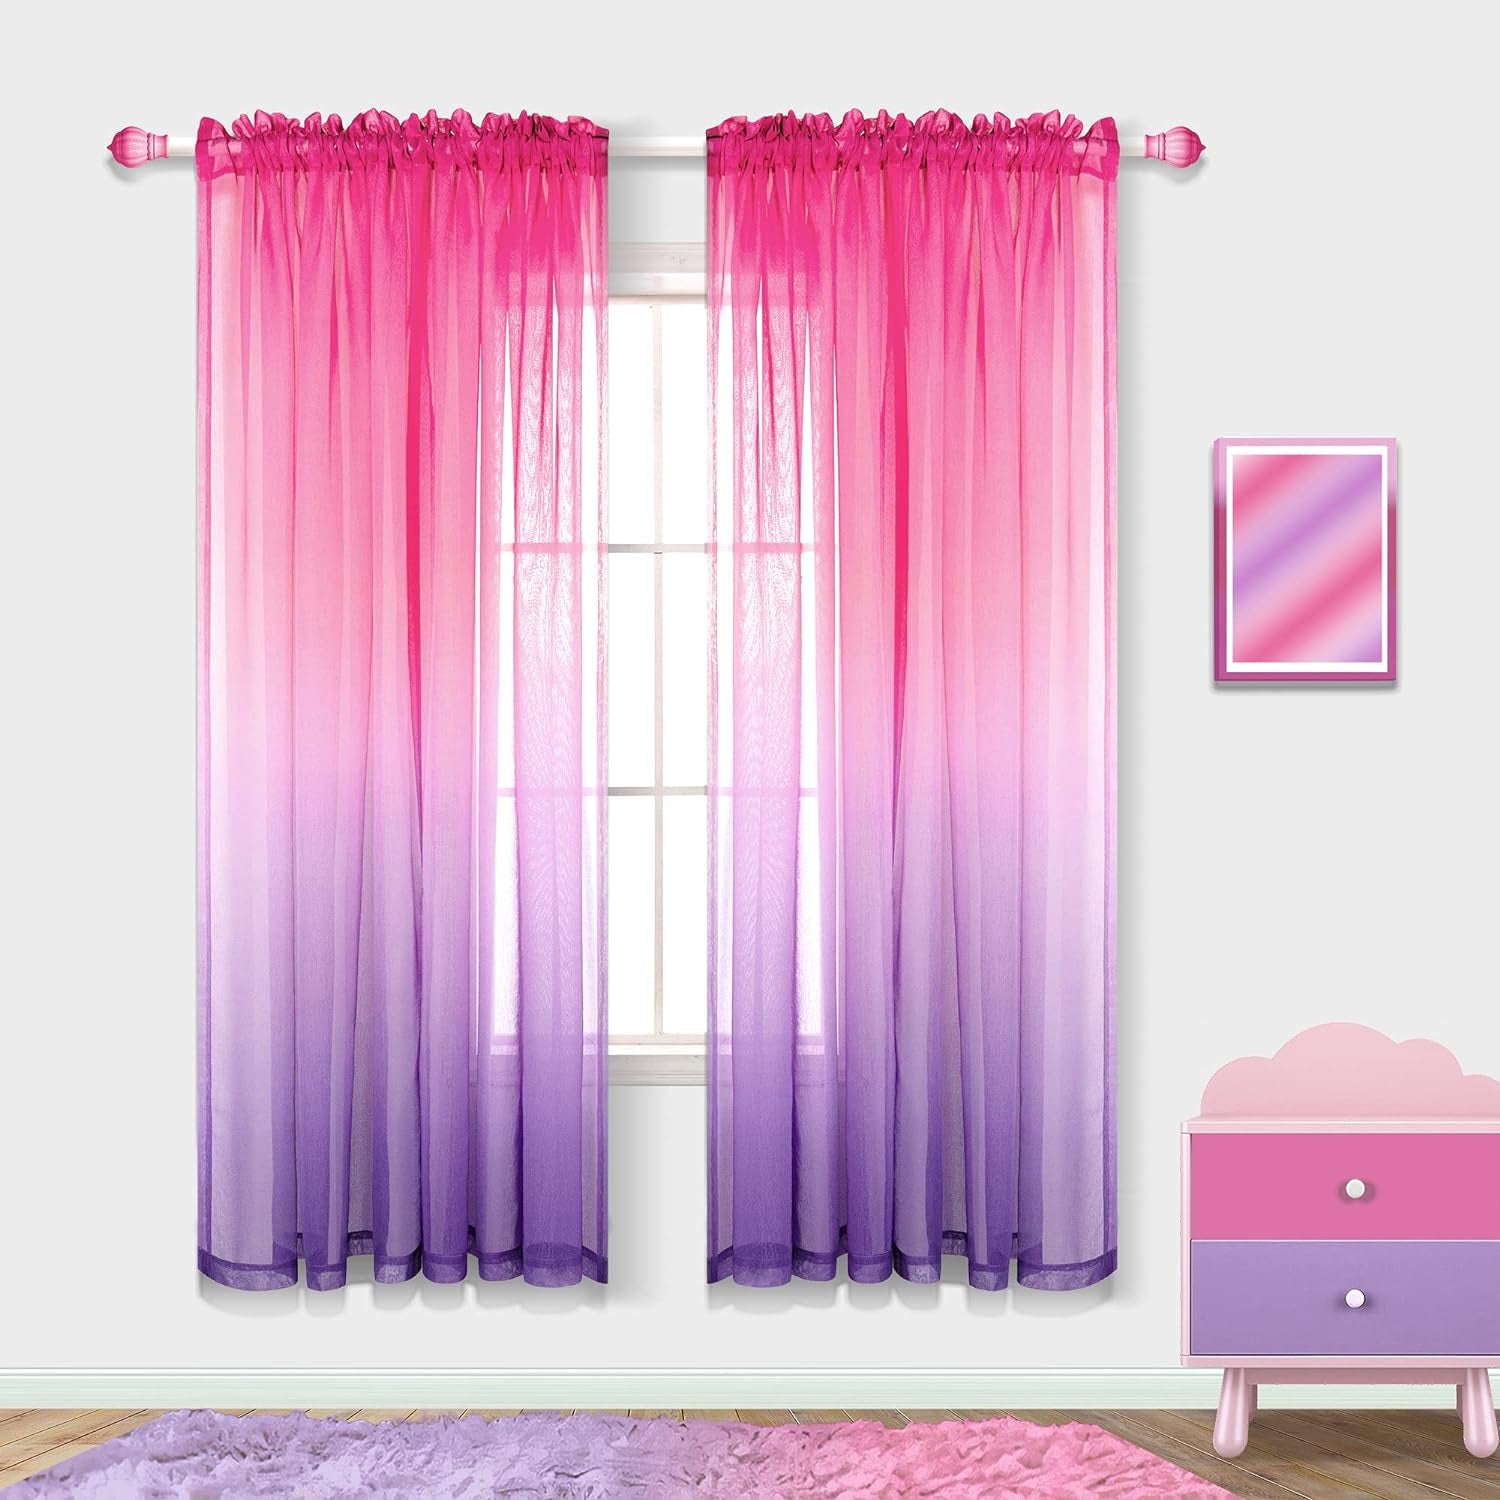 Spring Sheer Curtains for Living Room with Rod Pocket Window Treatments Decor 84 Inch Length Bedroom Curtain Set of 2 Panels Yellow and Grey Gray  PITALK TEXTILE Pink And Purple 52X63 